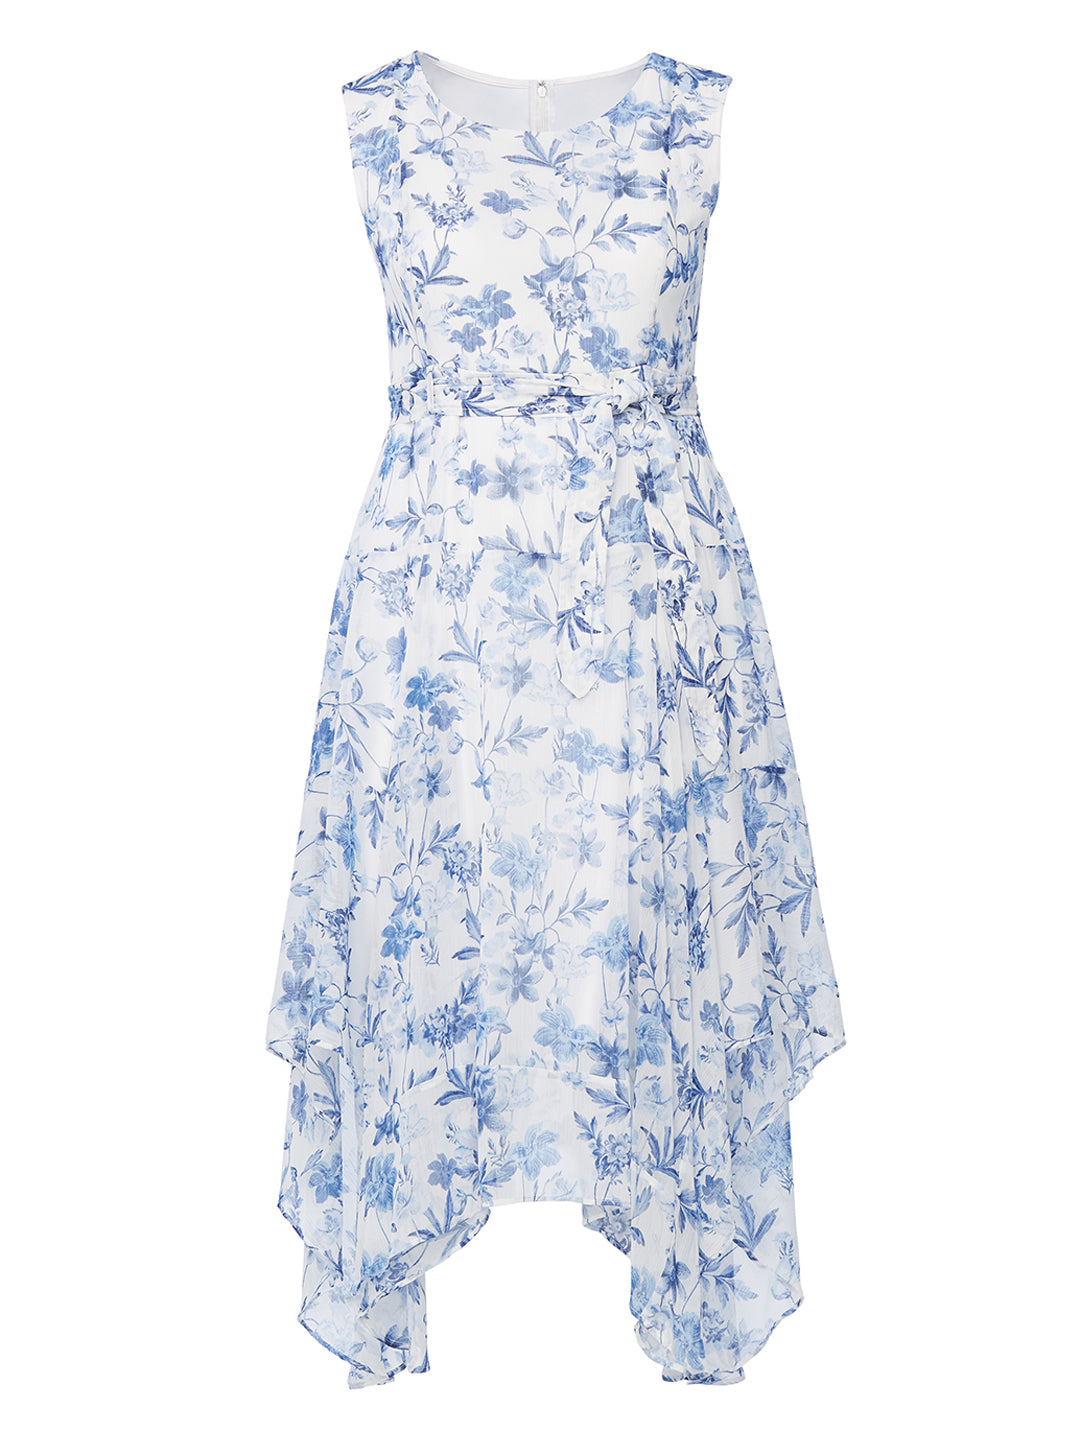 white dress with blue flowers